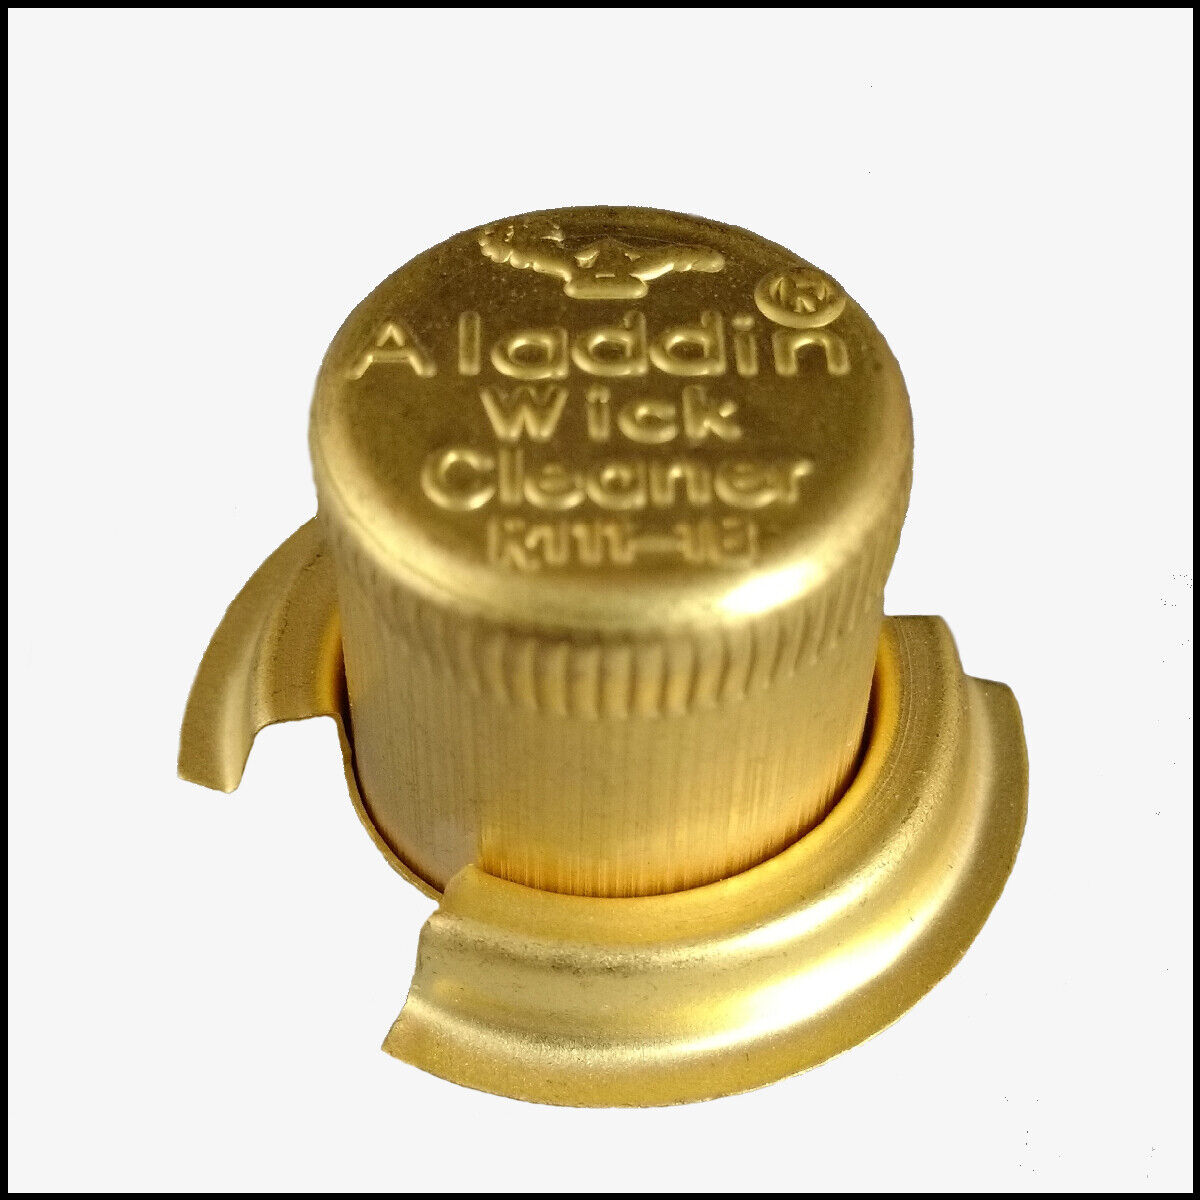 ALADDIN LAMP BRAND BRASS WICK CLEANER P/N R111-1B  Replaces R111 Wick Cleaner